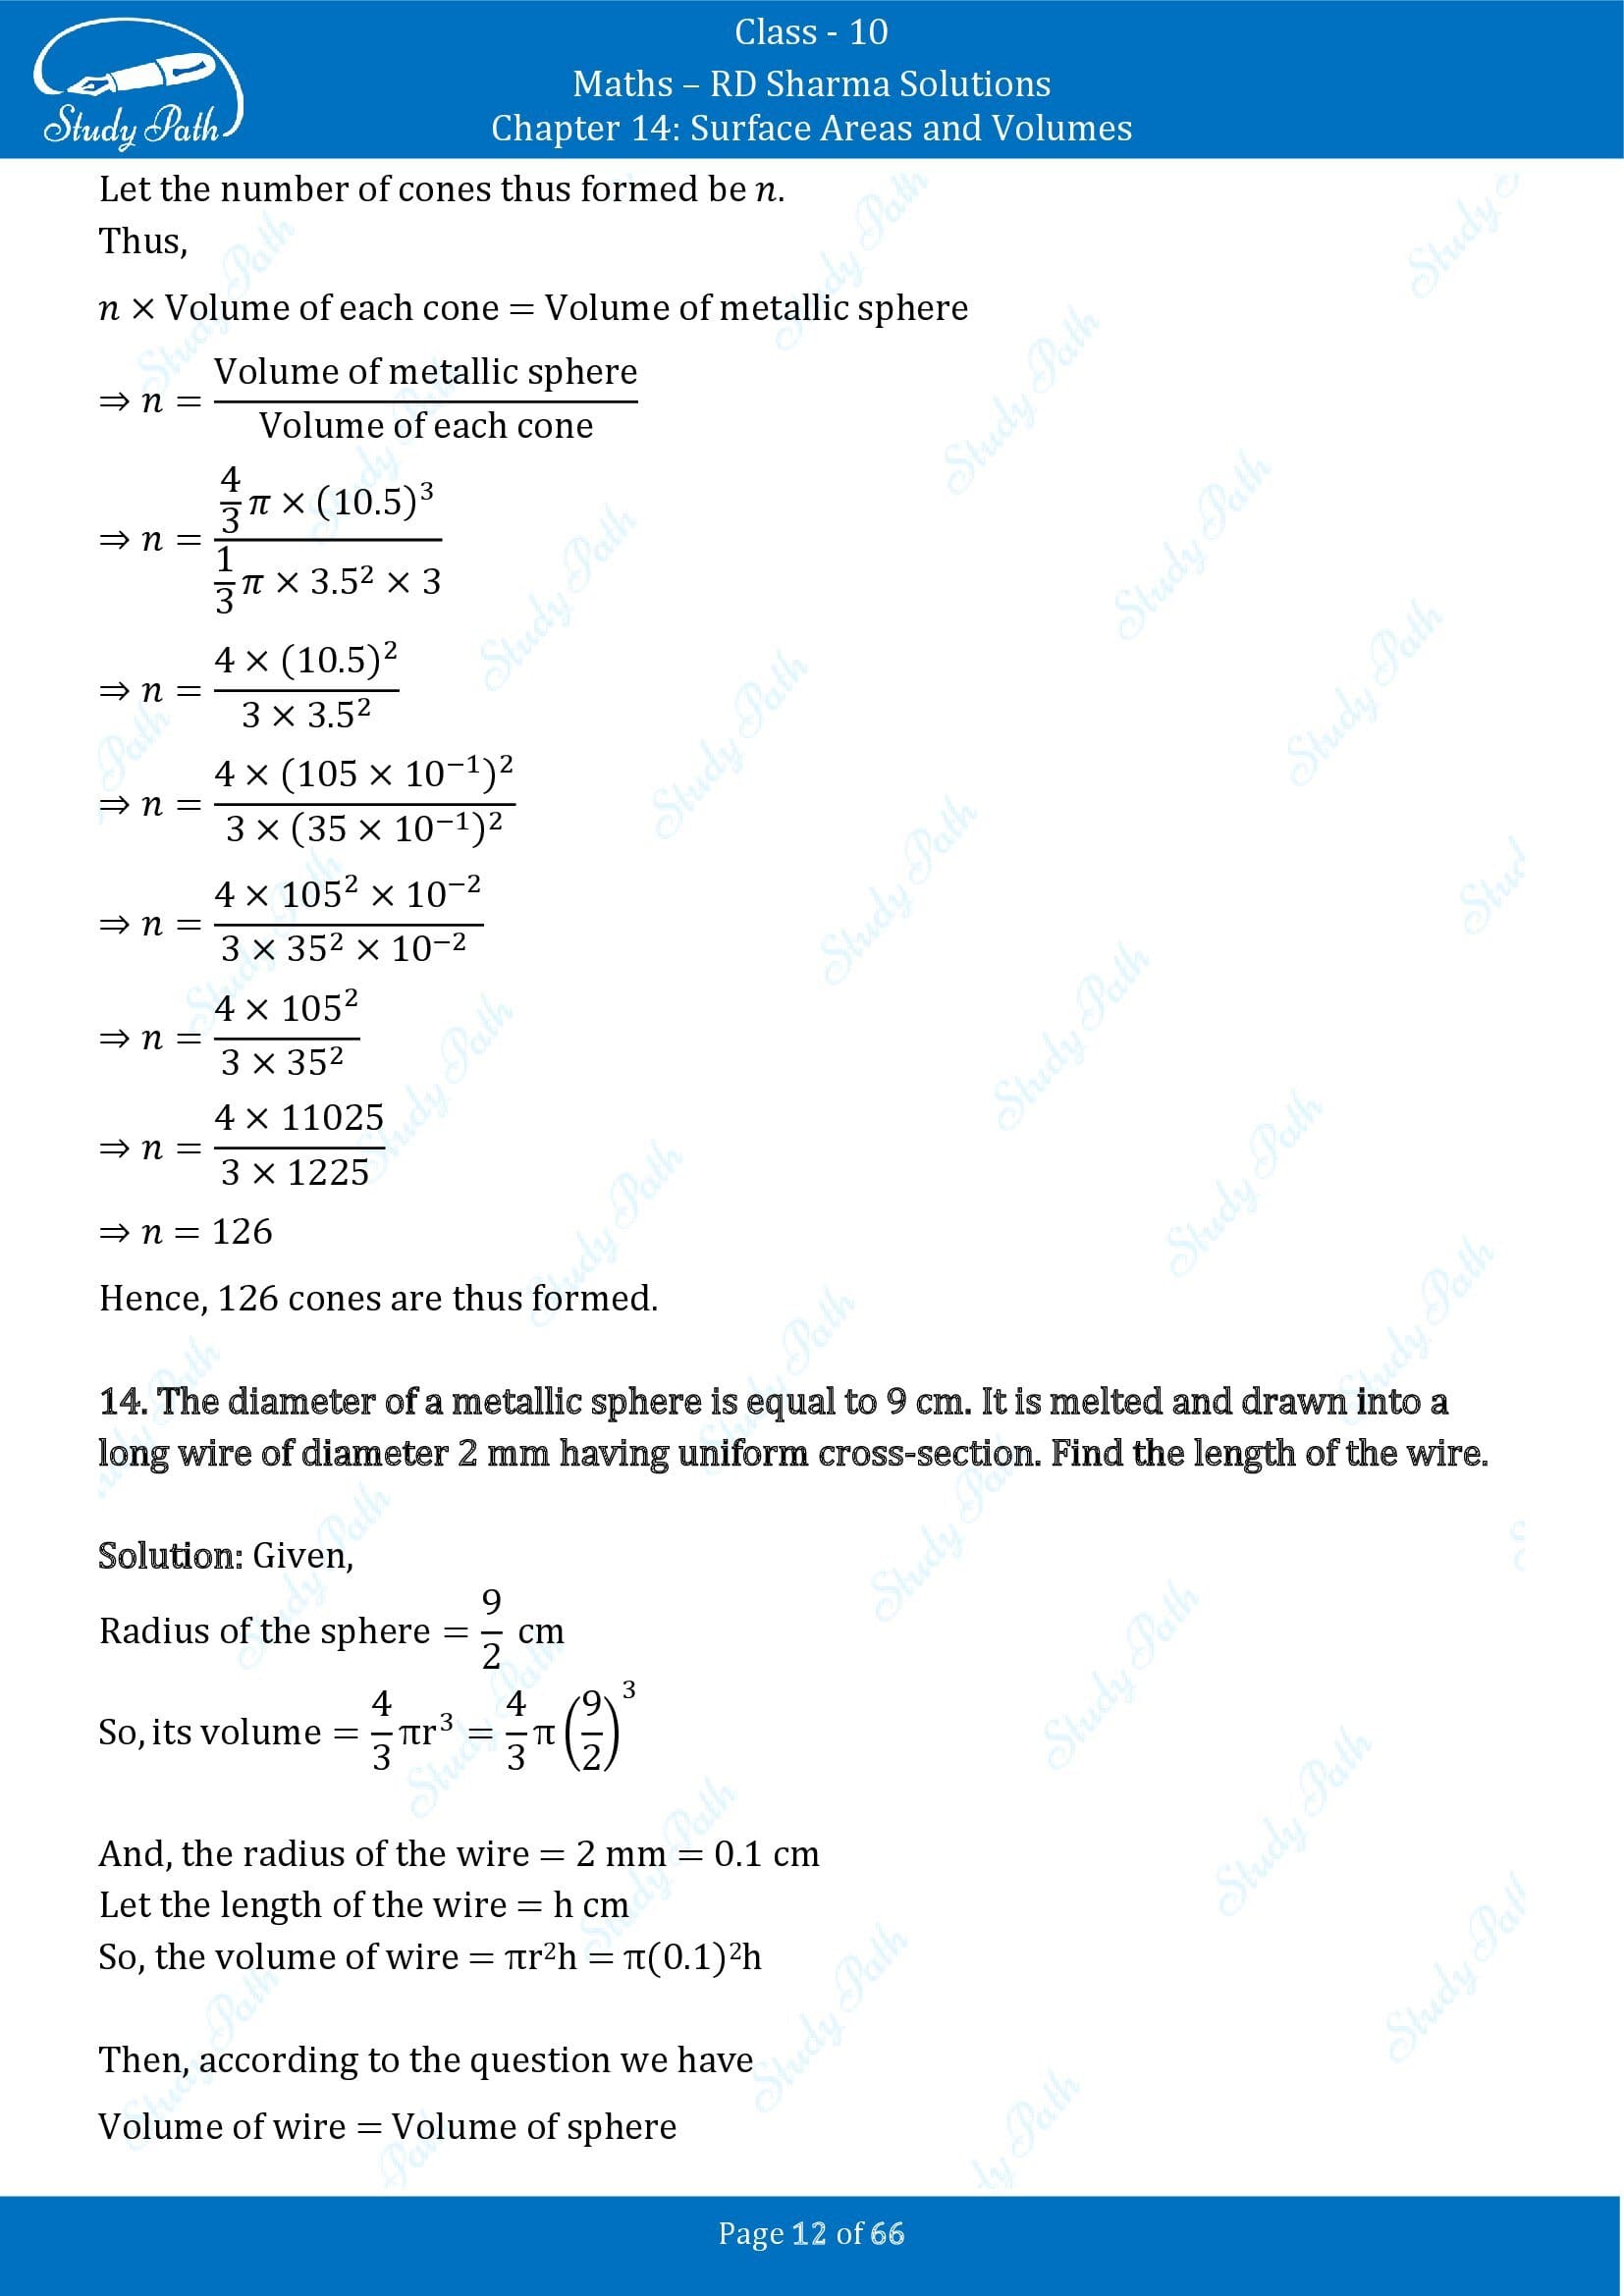 RD Sharma Solutions Class 10 Chapter 14 Surface Areas and Volumes Exercise 14.1 00012